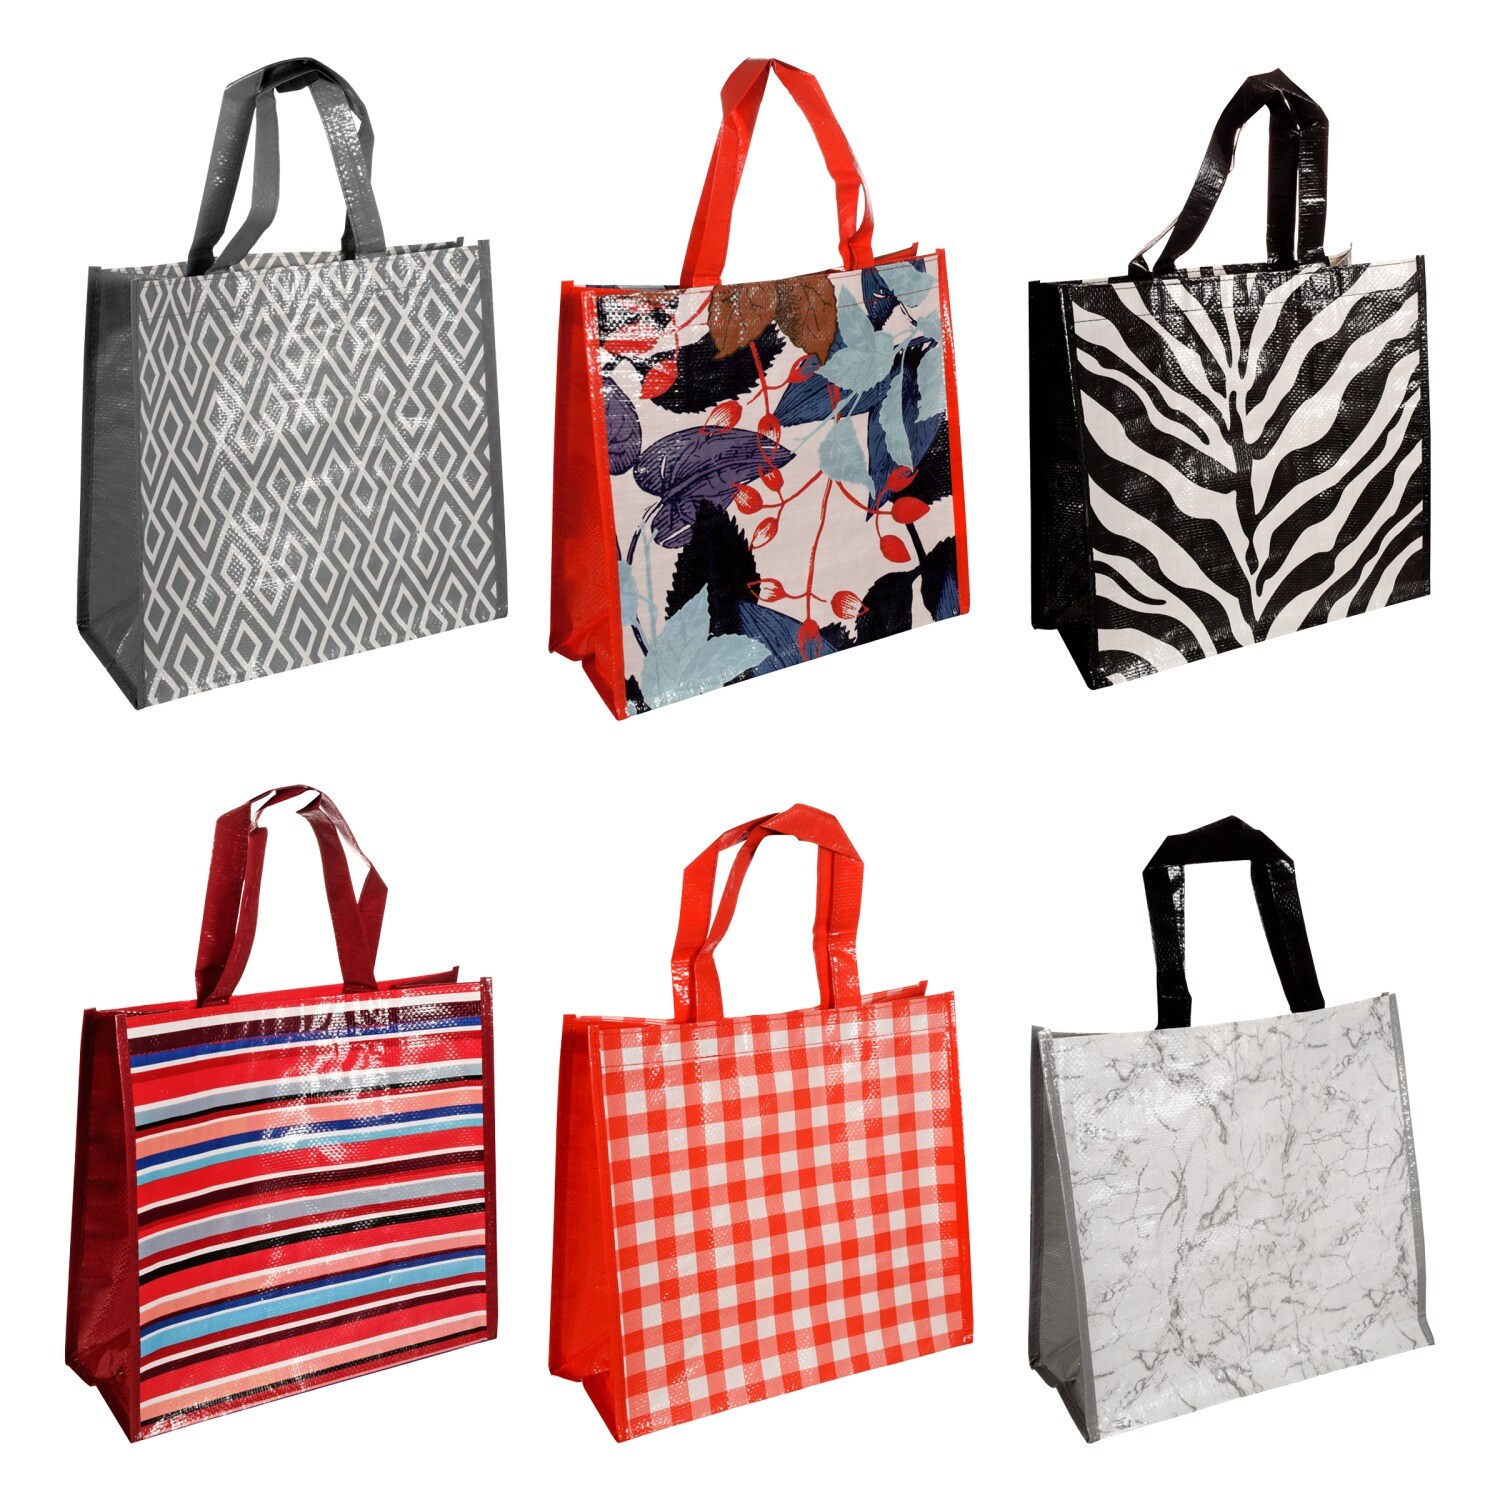 Shopping Tote Bags | DollarTree.com